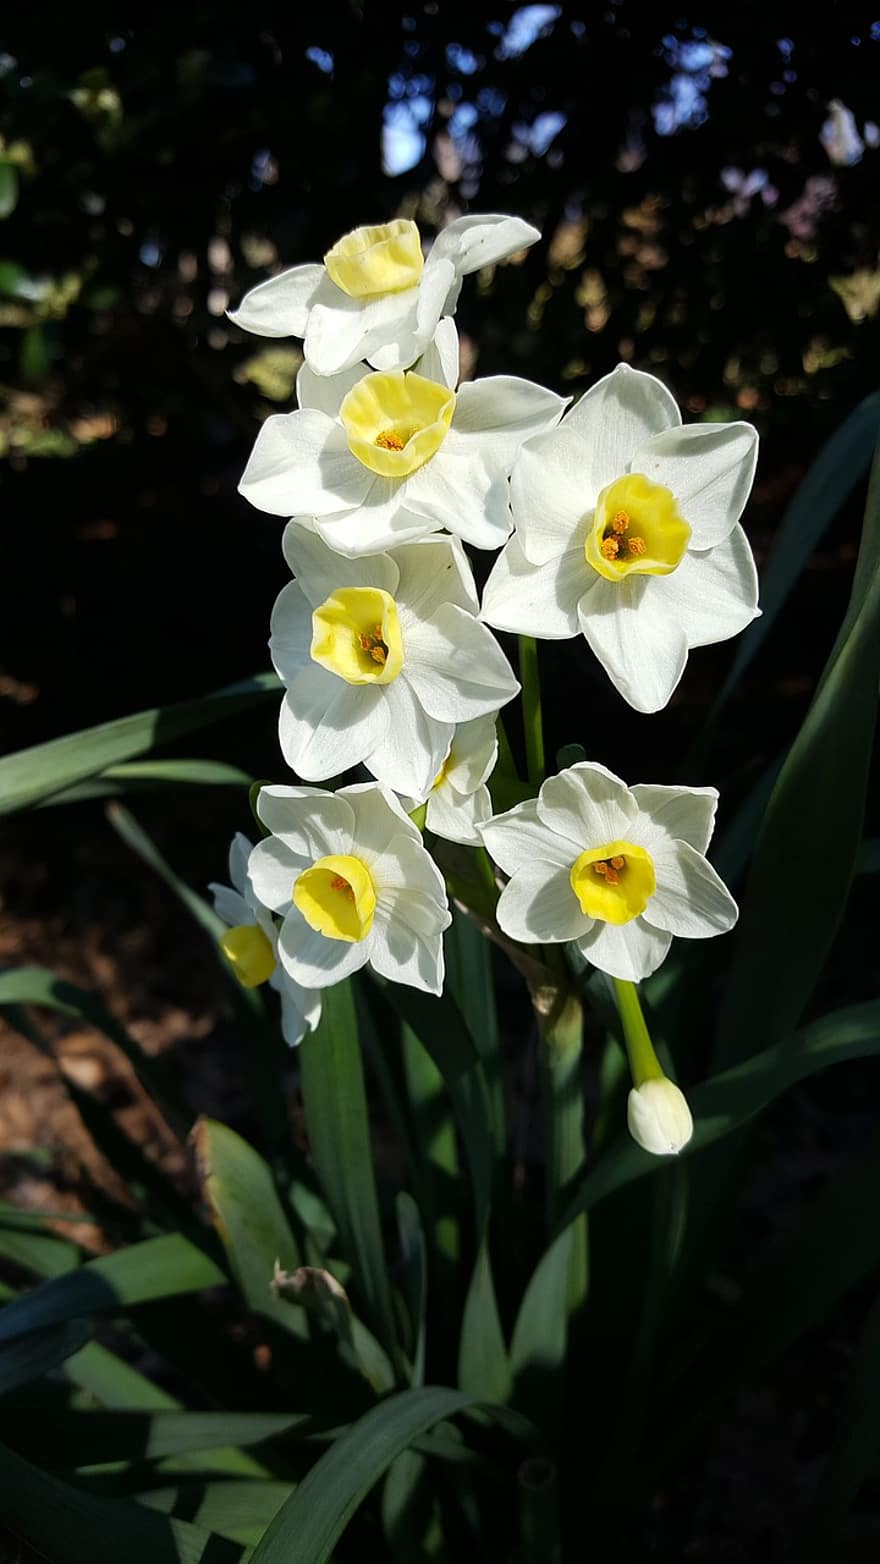 Daffodils, Flowers, Plant, Narcissus, White Flowers, Petals, Bud, Bloom, Leaves, Spring, Nature